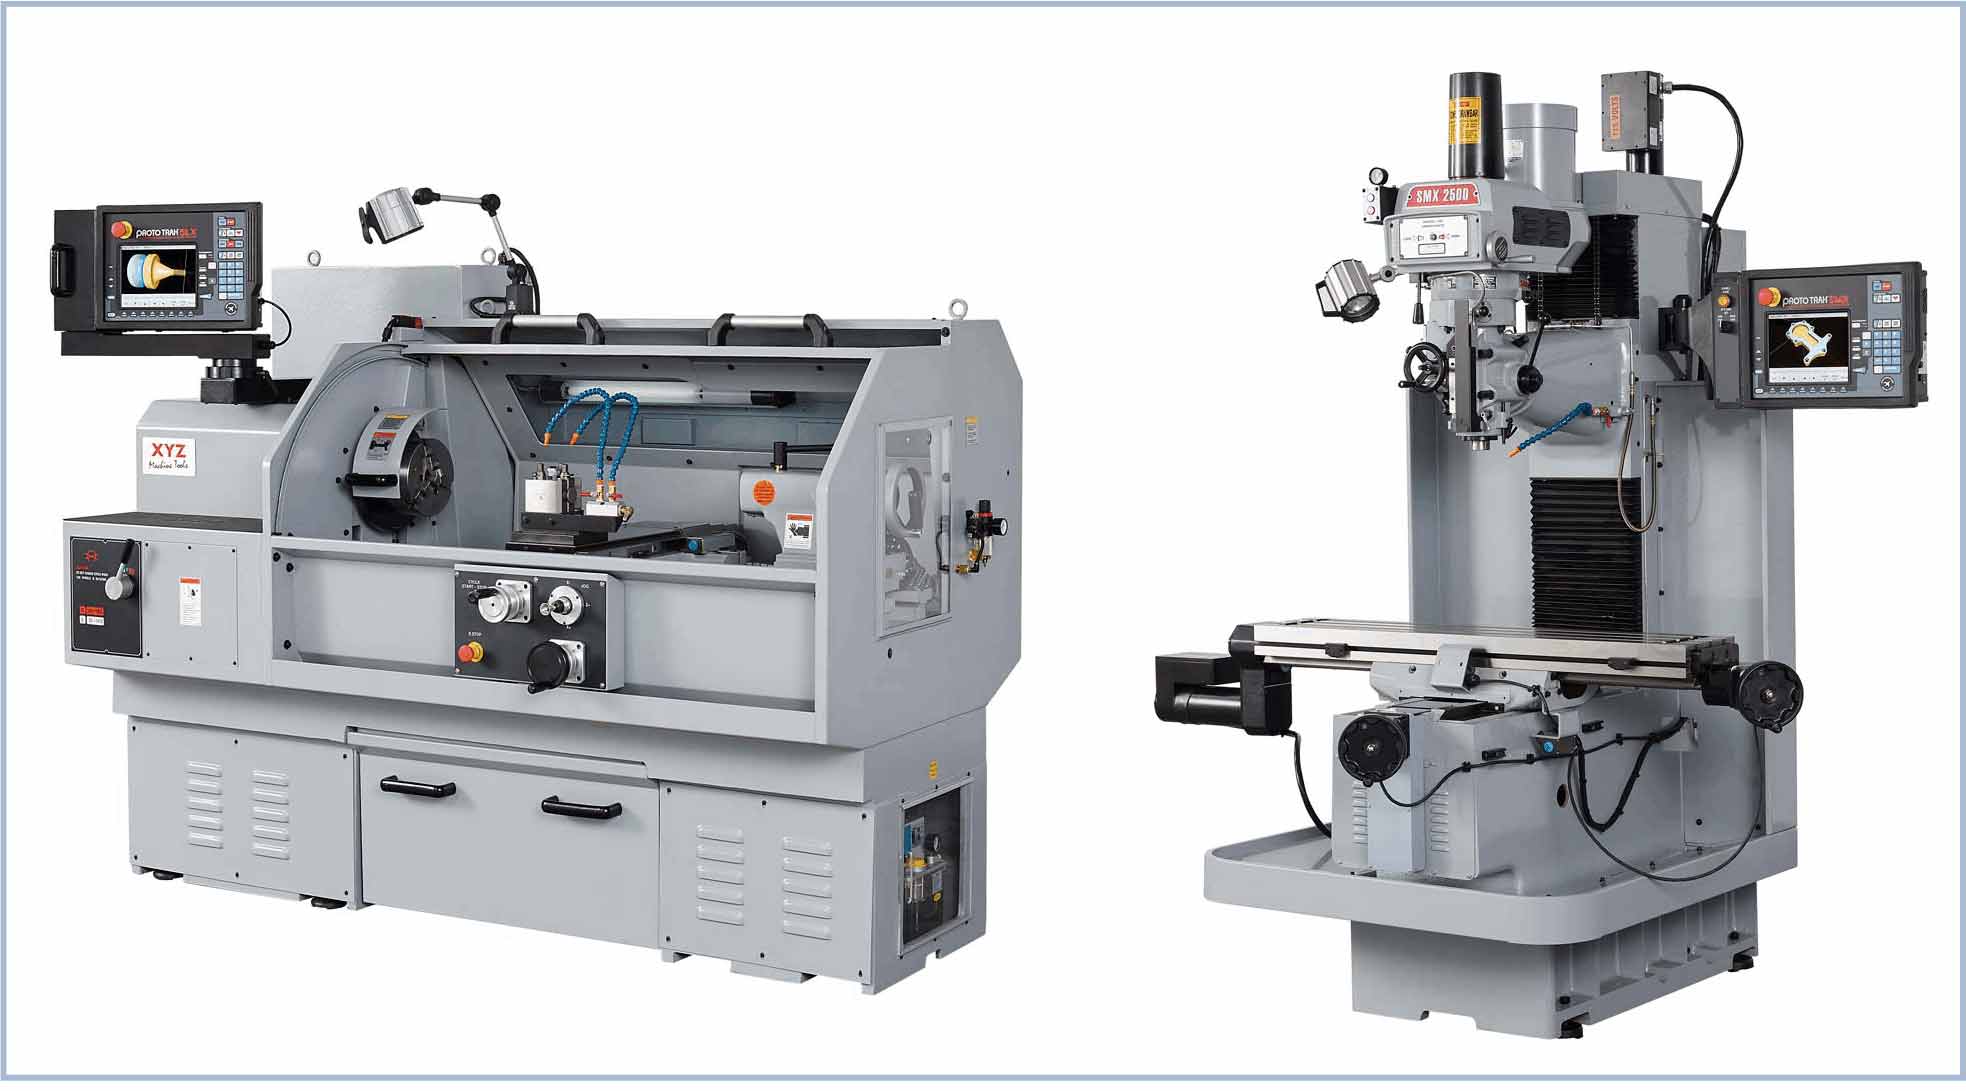 lcm-systems-investe-ps40000-xyz-cnc-mill-lathe-expand-internal-machining-facility